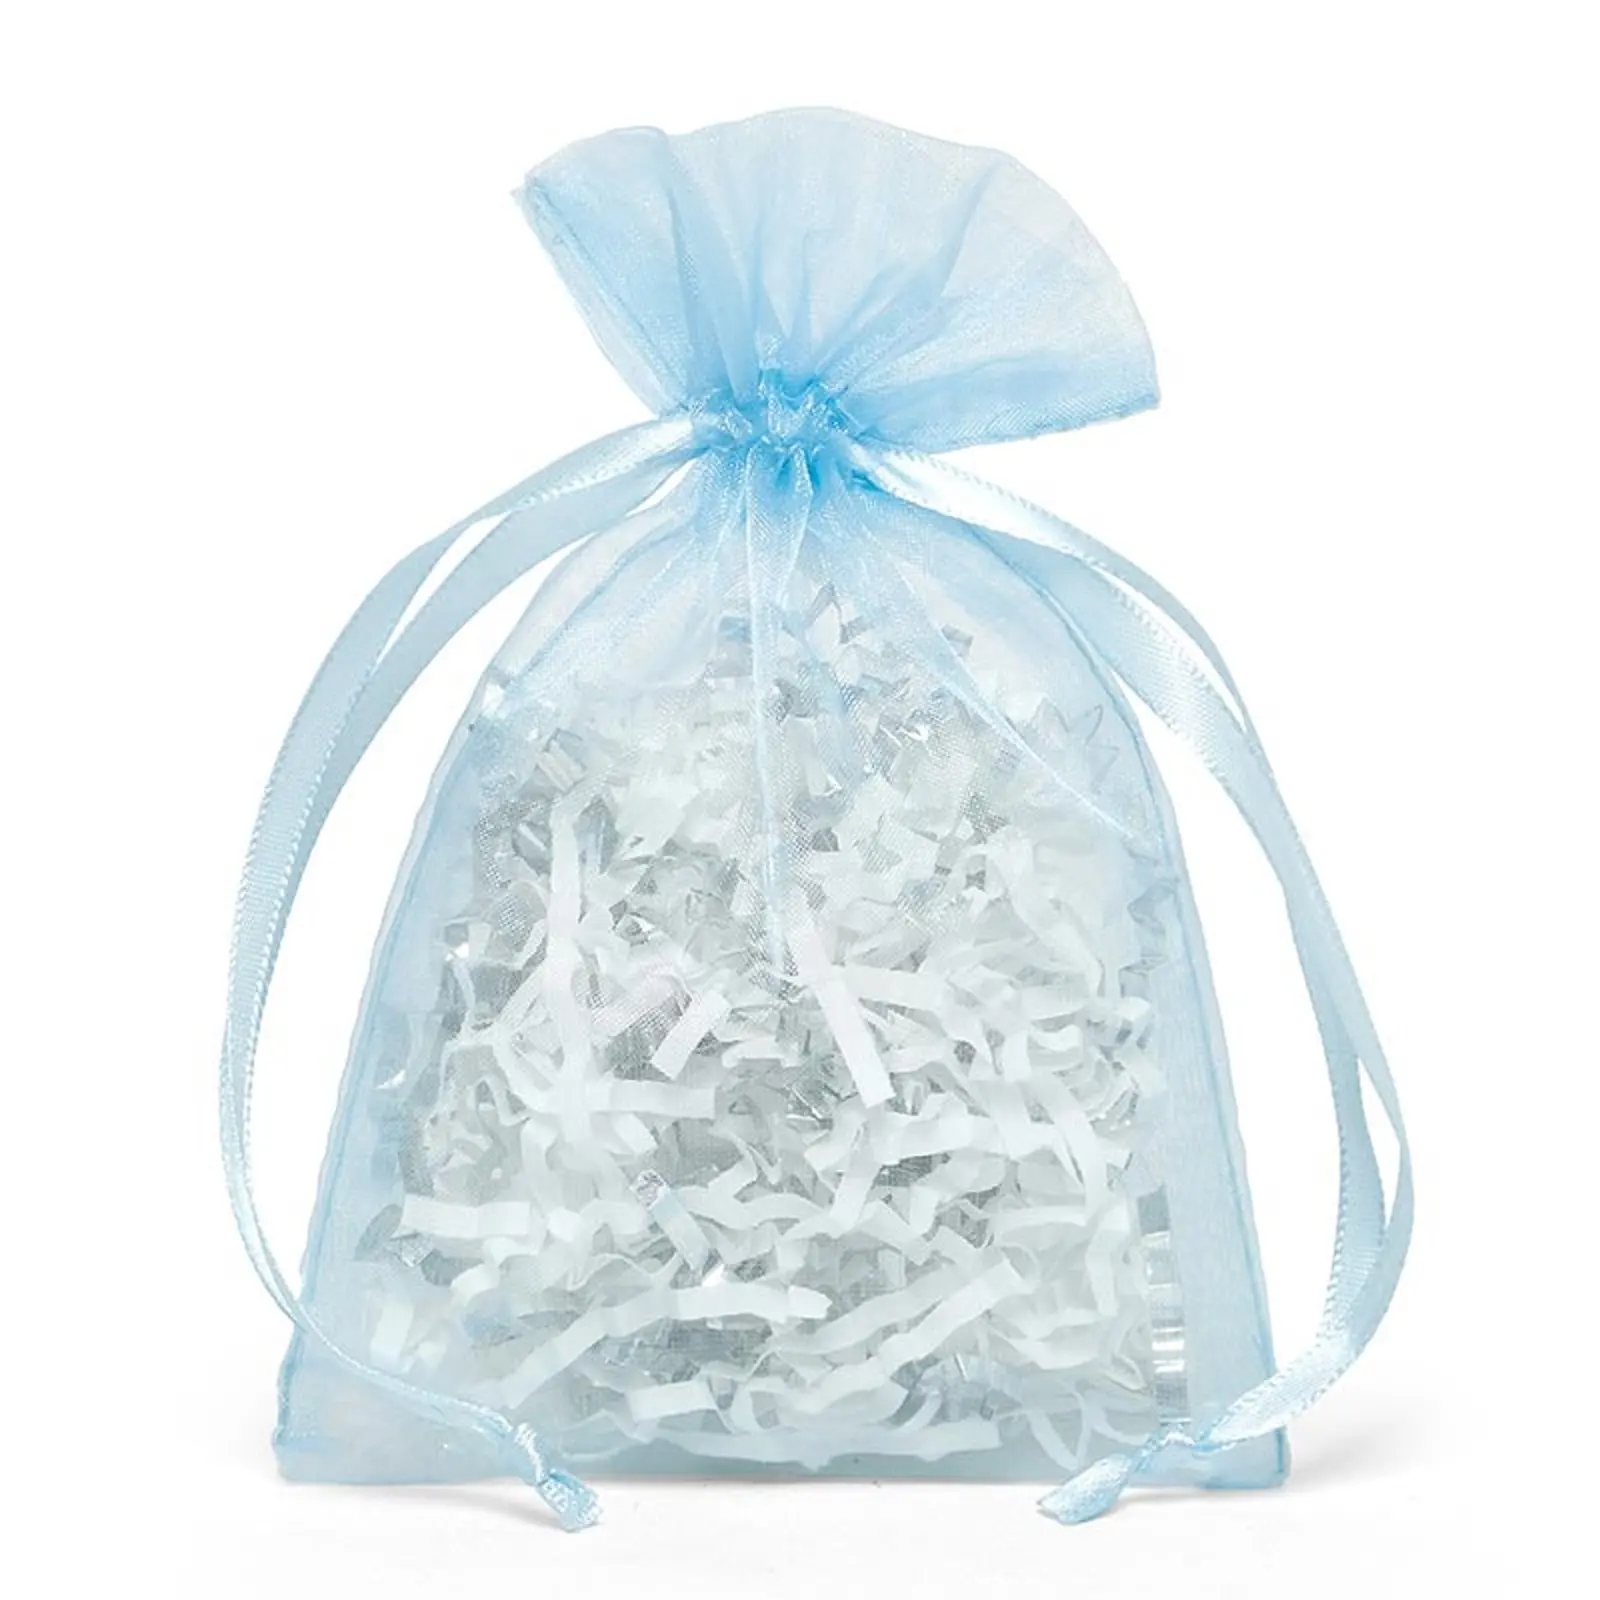 Exquisite Light Blue Organza Satin Drawstring Bags with 10 Sizes in Stock